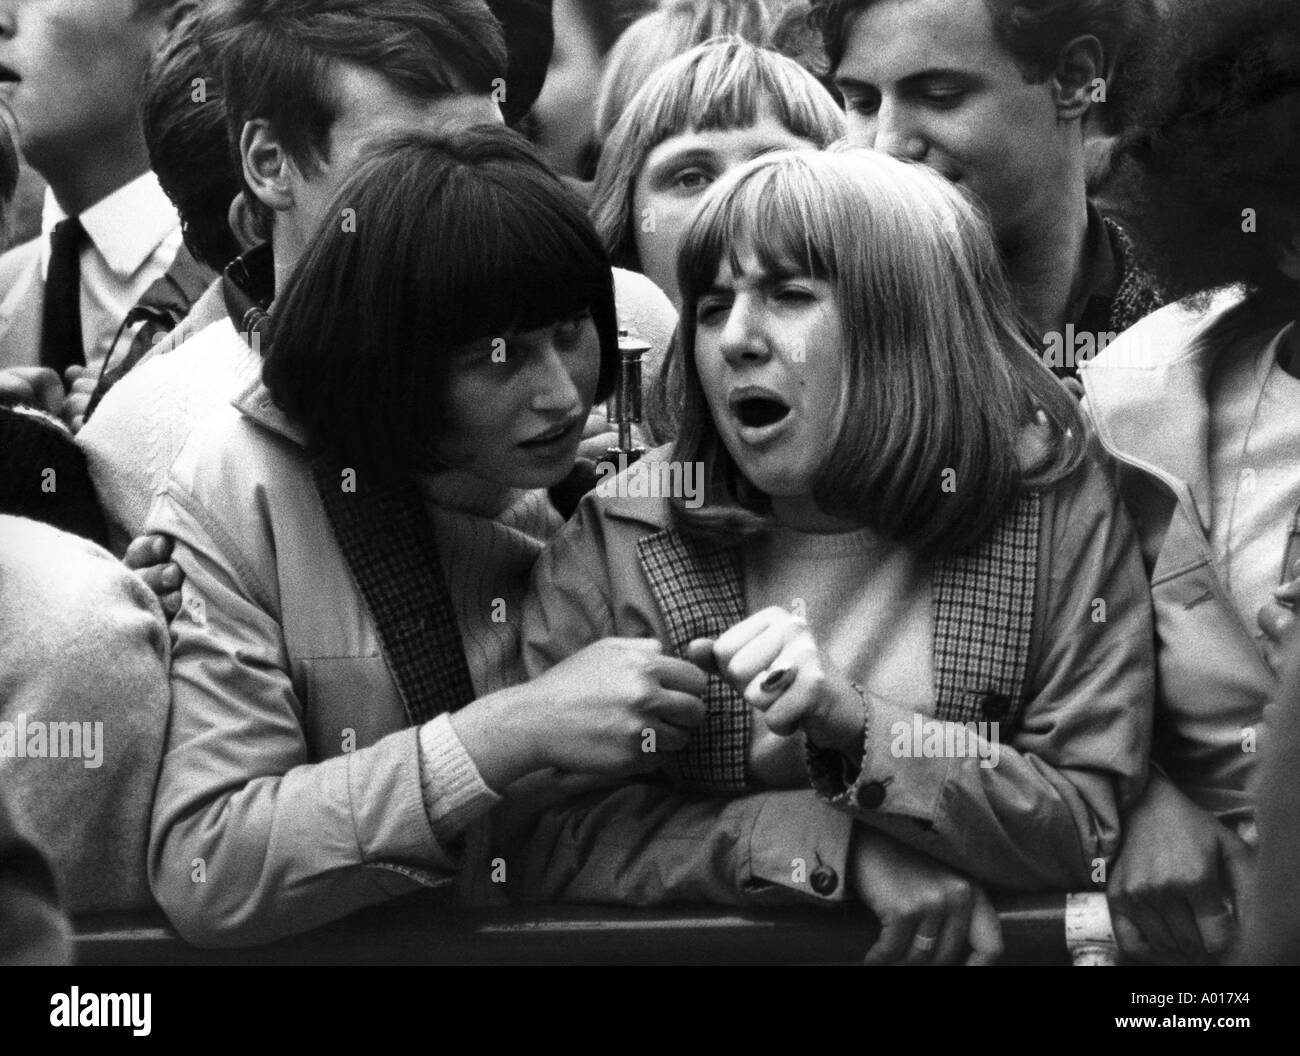 The Beatles, concert in Essen, Ruhr area, Gruga Hall, 1966, 1960s, the sixties, England, London, Great Britain, British pop band, music, musician, group, pop music, singers, youths waiting for entrance, young people, girls, boys, teens, teenager, fans, b& Stock Photo